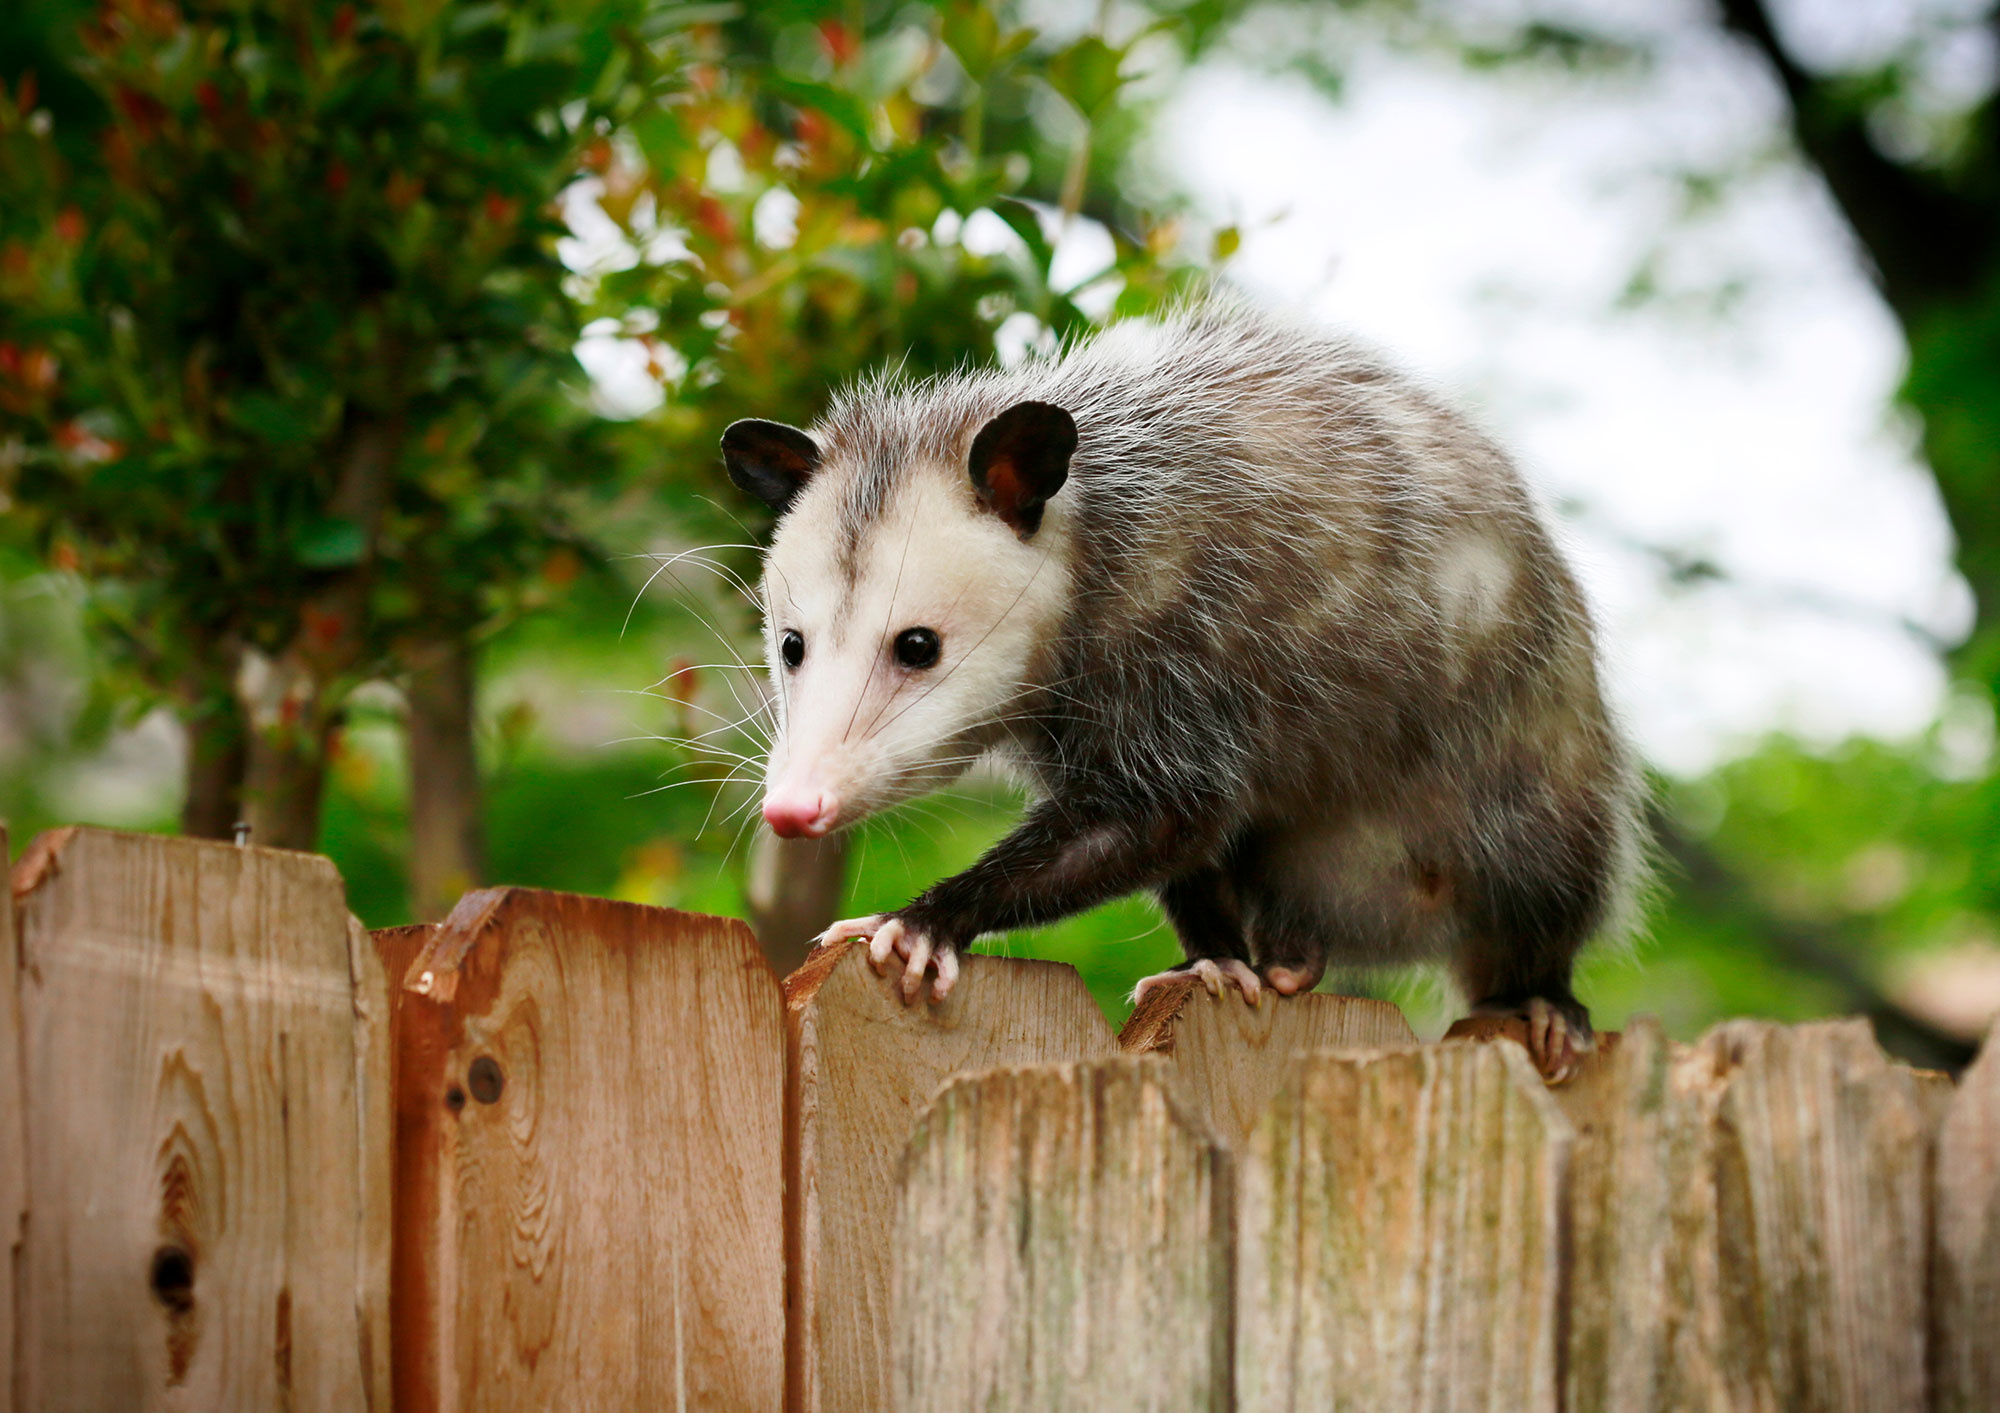 Opossums on the farm, Friend or foe debate, Agriculture challenges, Wildlife interactions, 2000x1420 HD Desktop